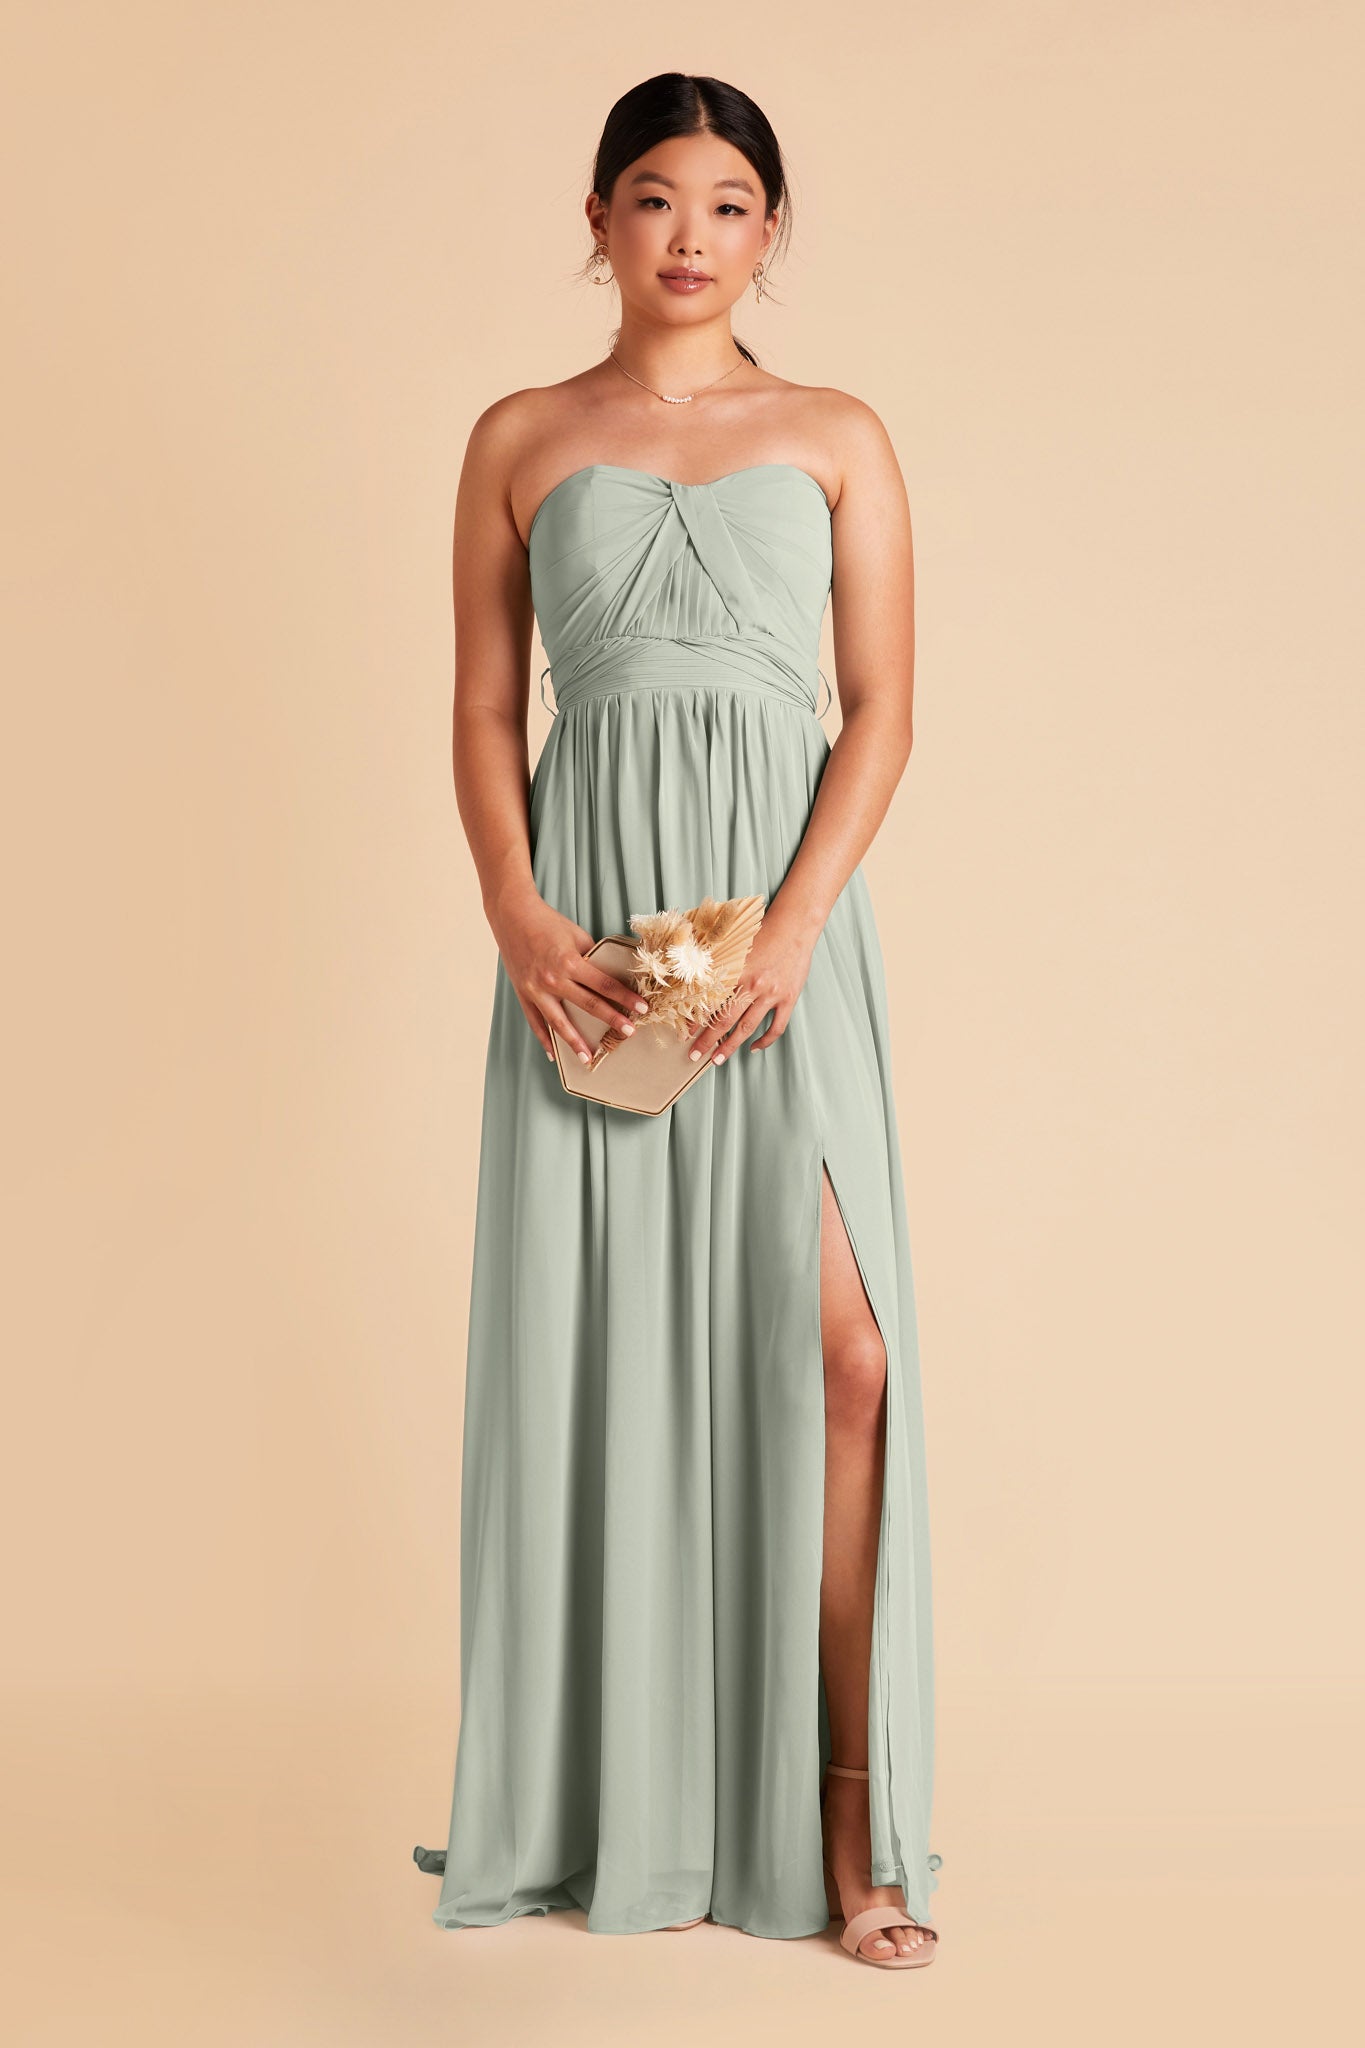 Front view of the Grace Convertible Bridesmaid Dress in sage chiffon on a slender model with light skin whose left leg peeks out through a slit in the flowing floor-length skirt.